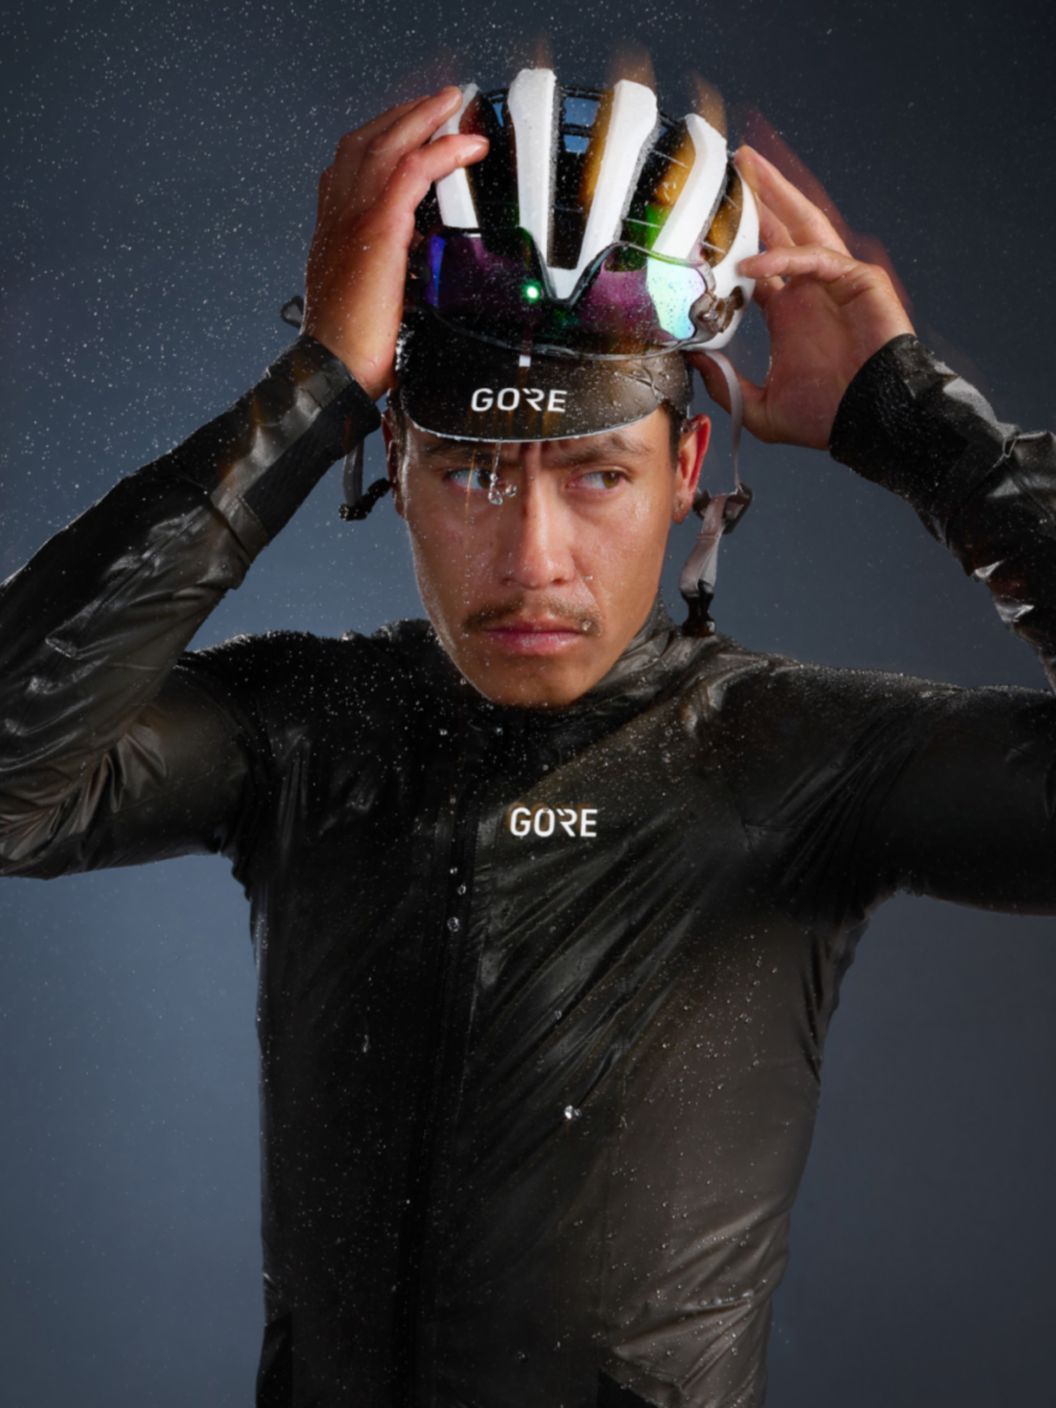 A glowy and slightly motion-blurred image of a road rider in wet weather riding apparel standing and adjusting their helmet in the rain. 